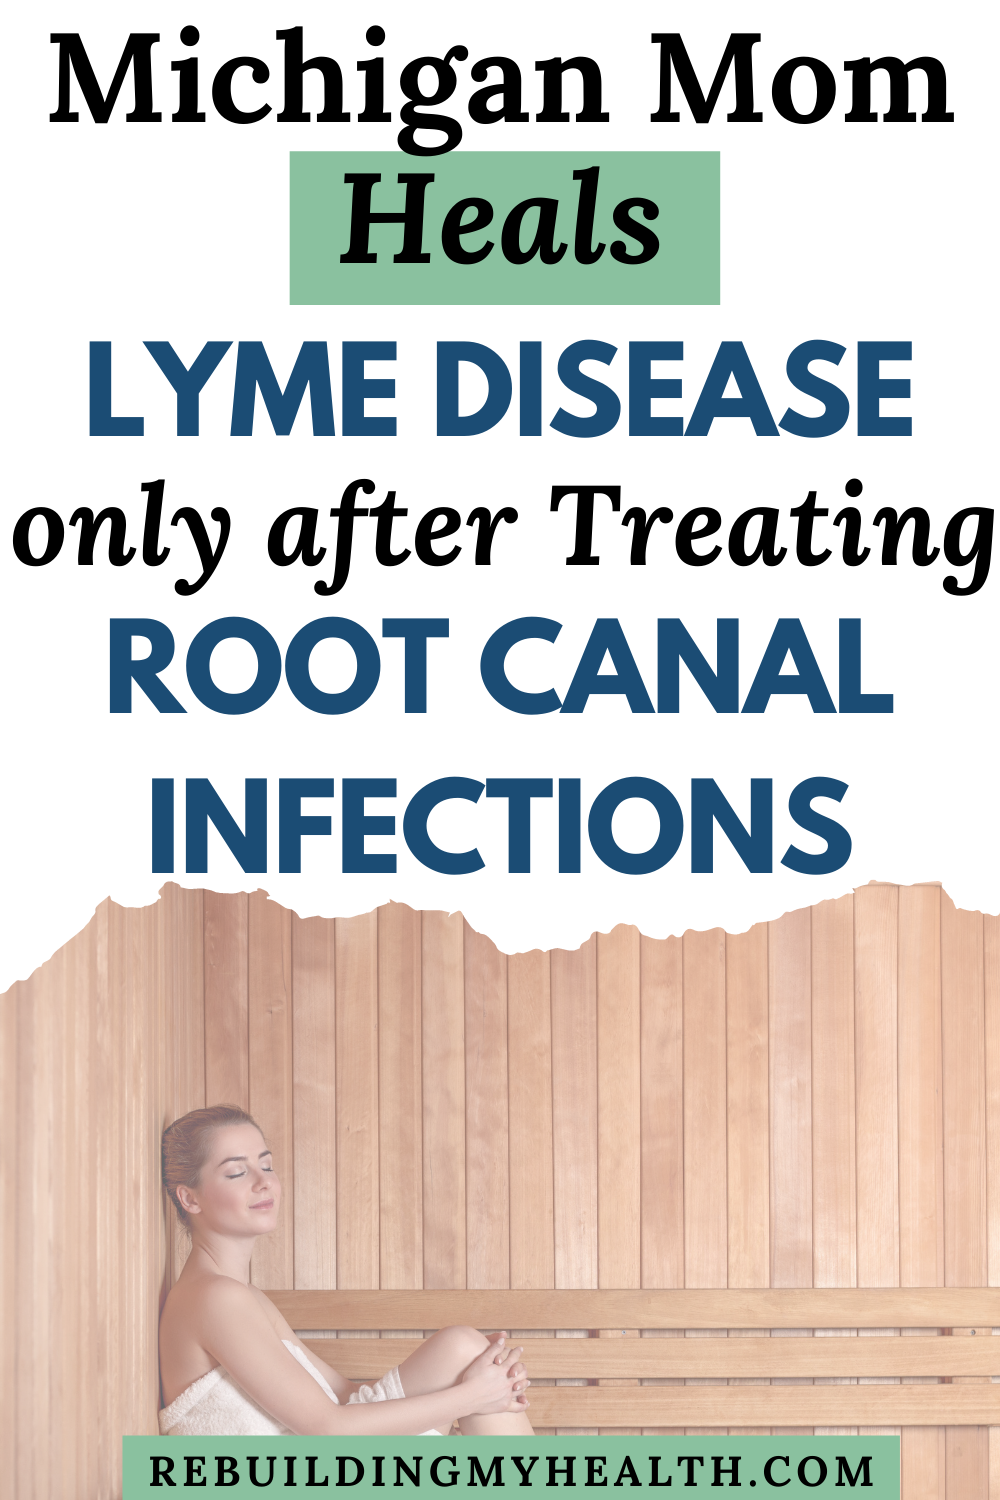 A Michigan woman finally heals from Lyme disease after taking herbs, and discovering and treating unknown root canal infections with ozone therapy.